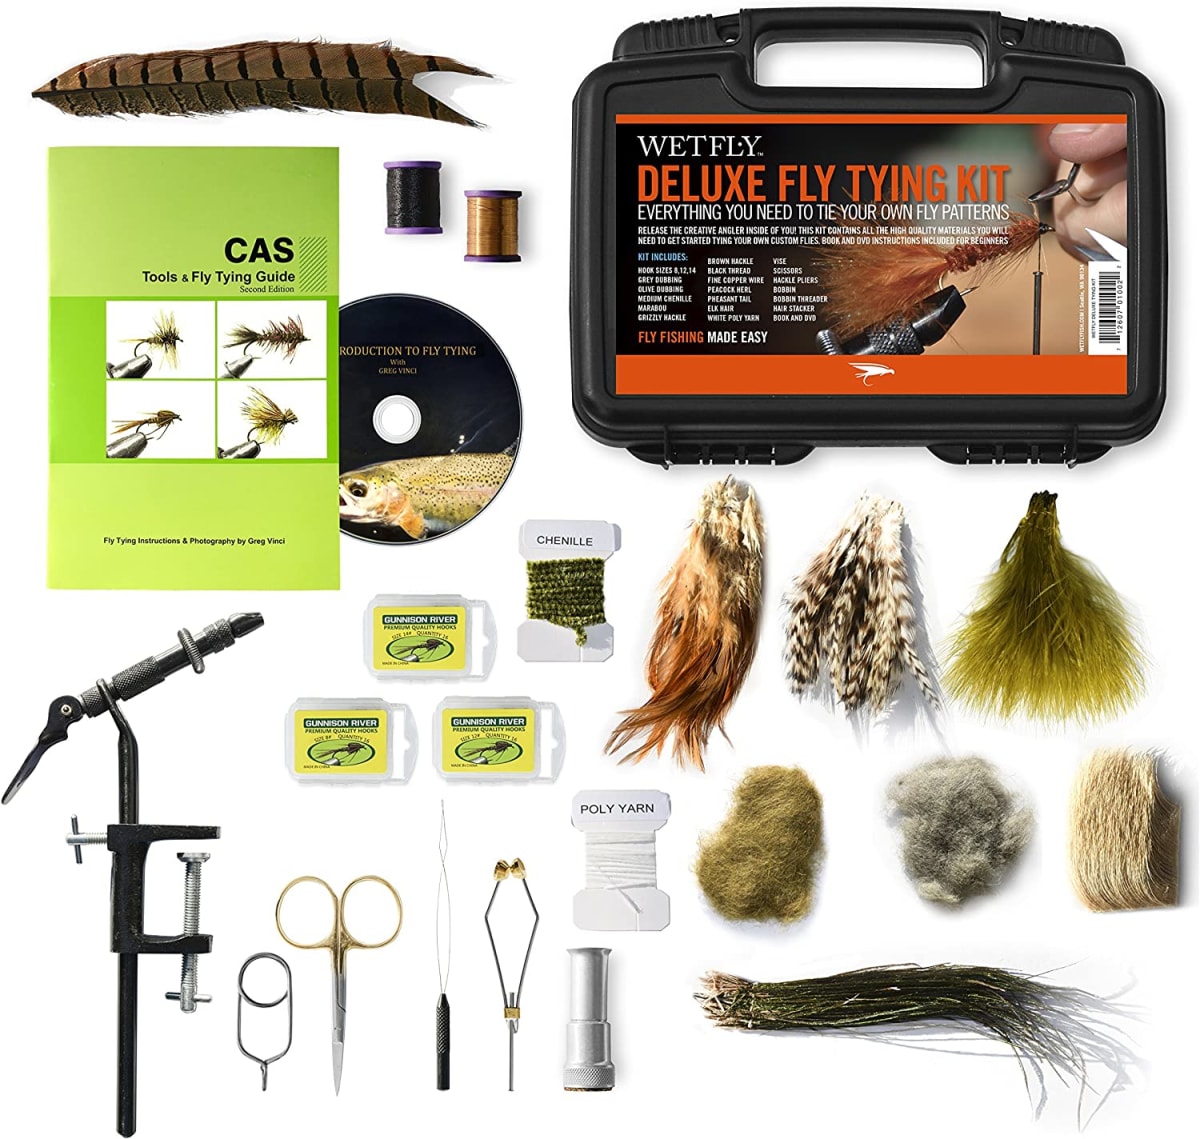 Deluxe Fly Tying Kit with Book and Dvd